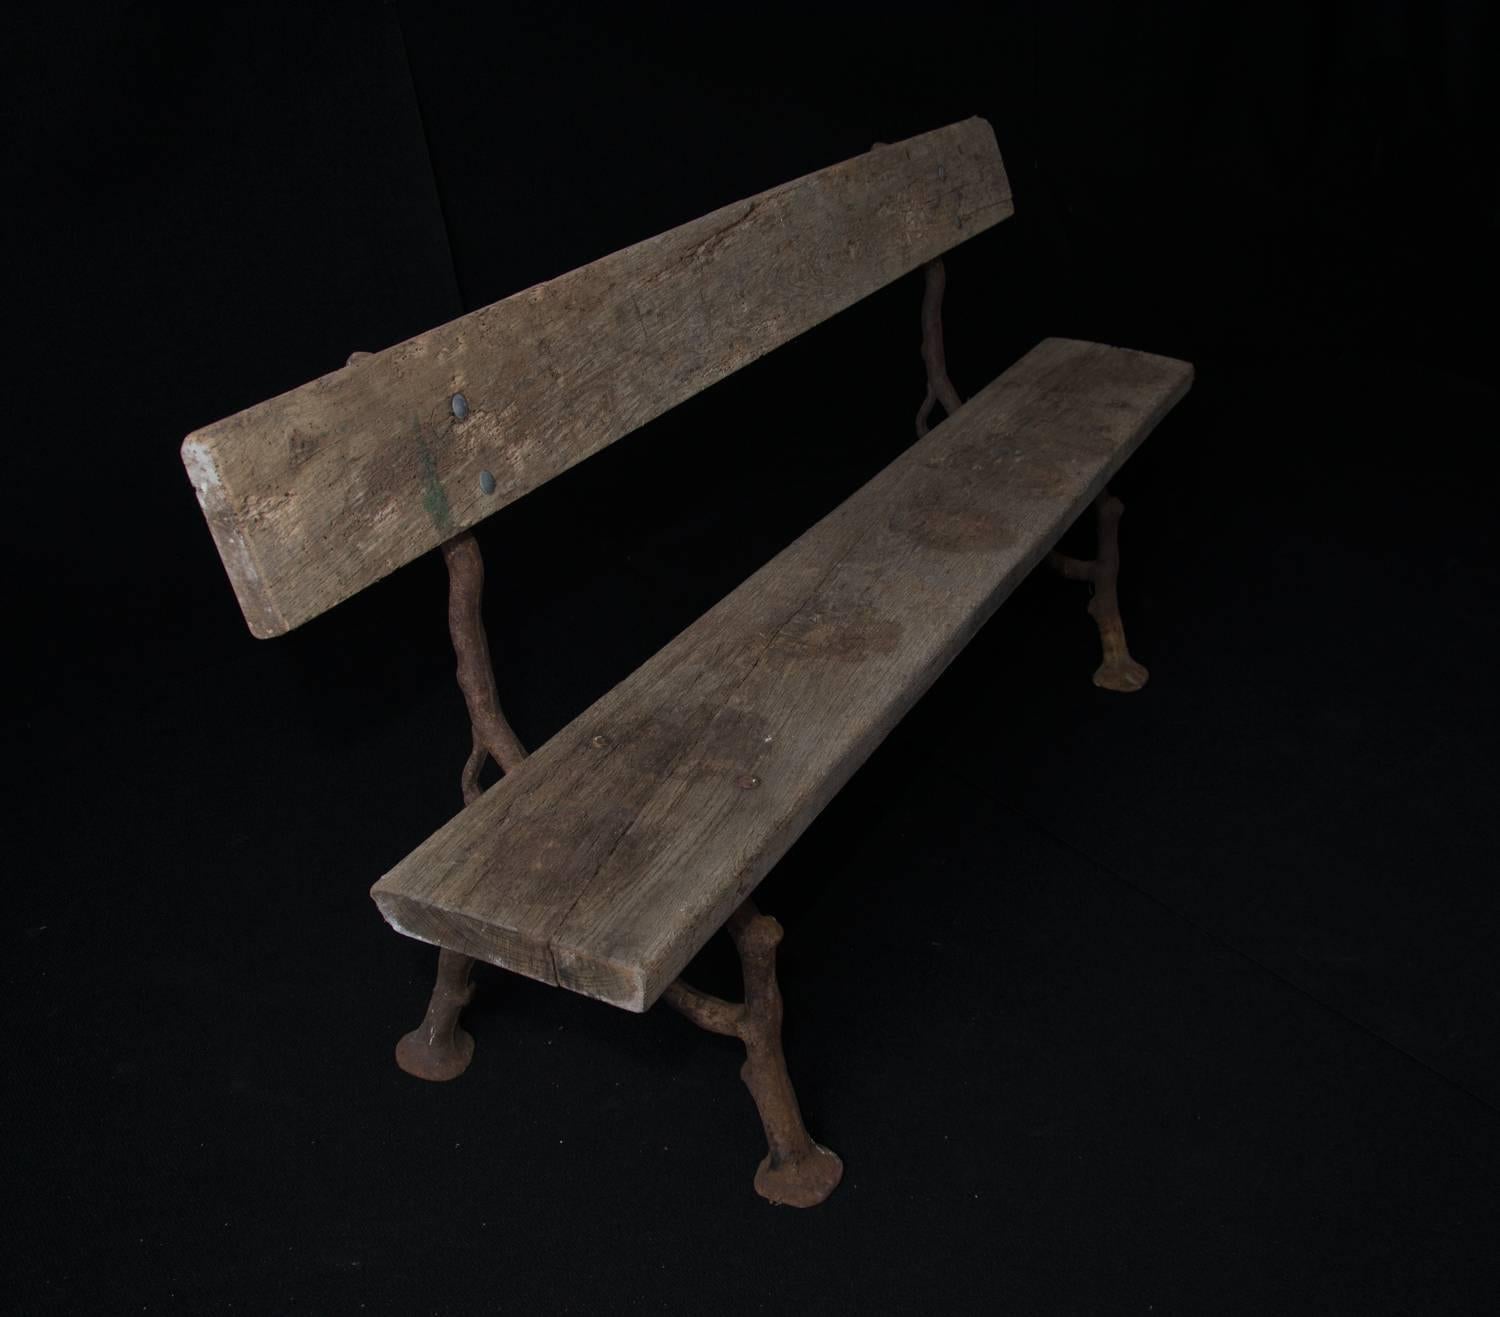 Unique late 19th century French garden bench with unusual faux bois cast-iron legs and a fabulous aged patina.

